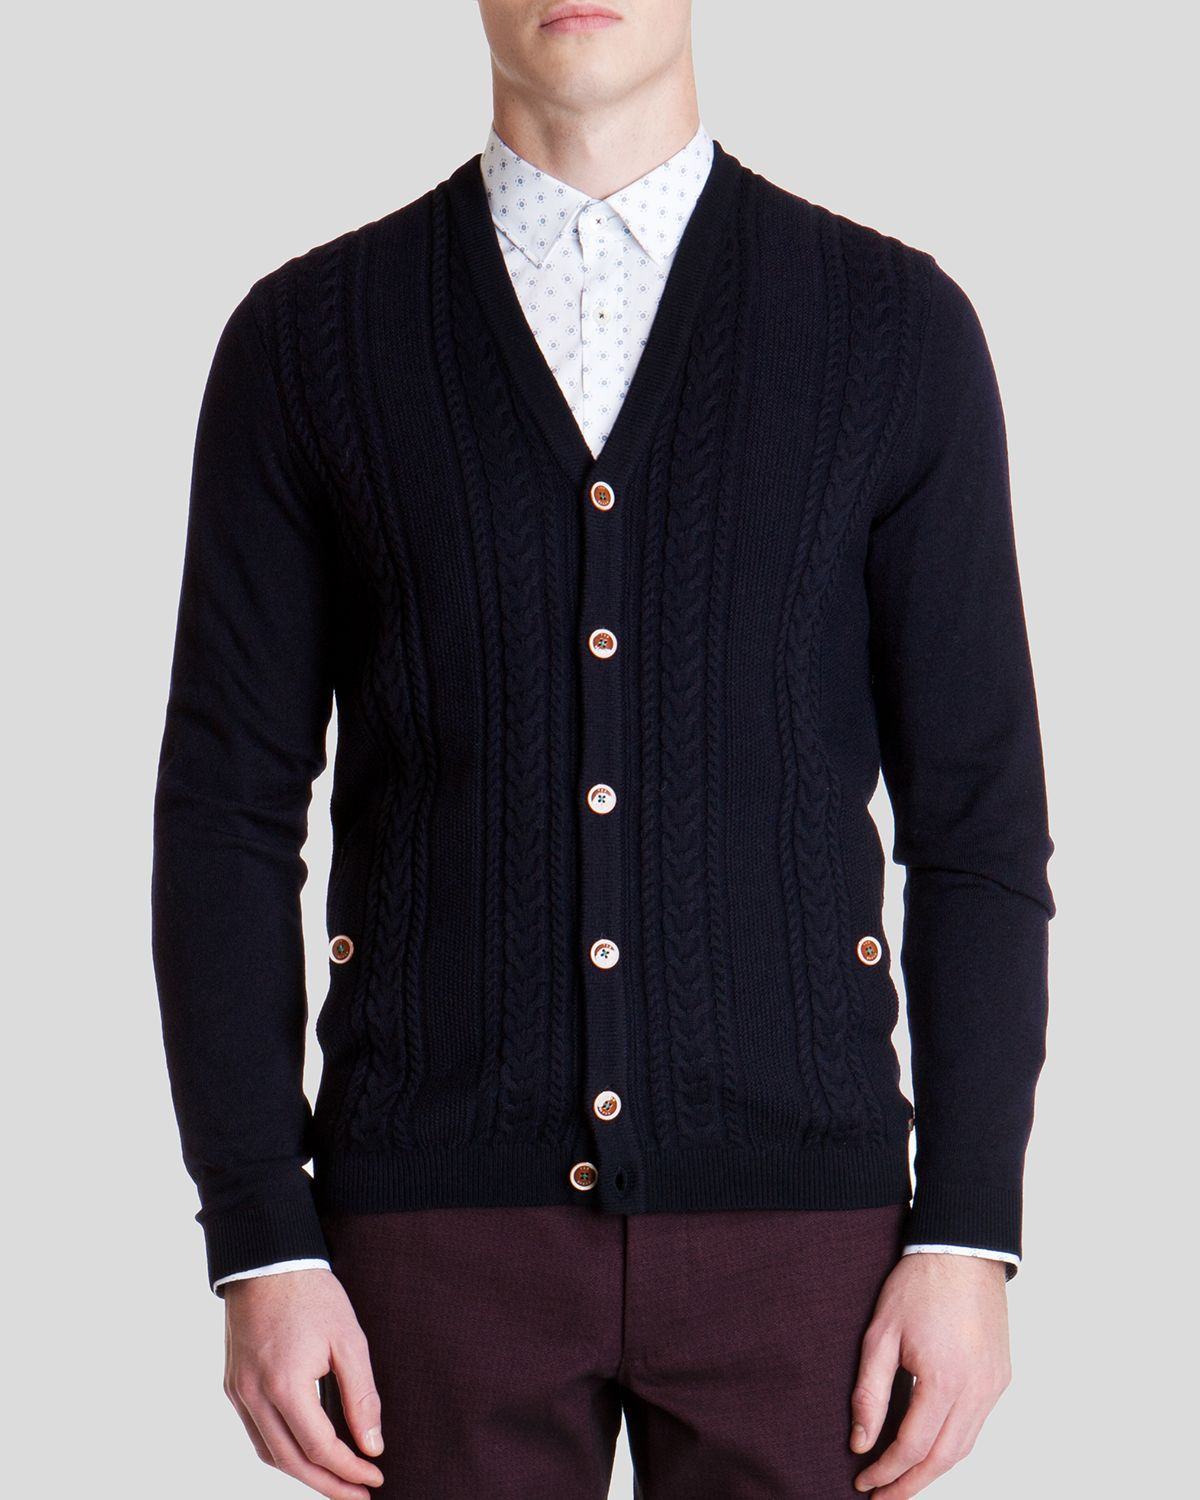 Ted Baker Exford Cable Knit Cardigan in Navy (Blue) for Men - Lyst